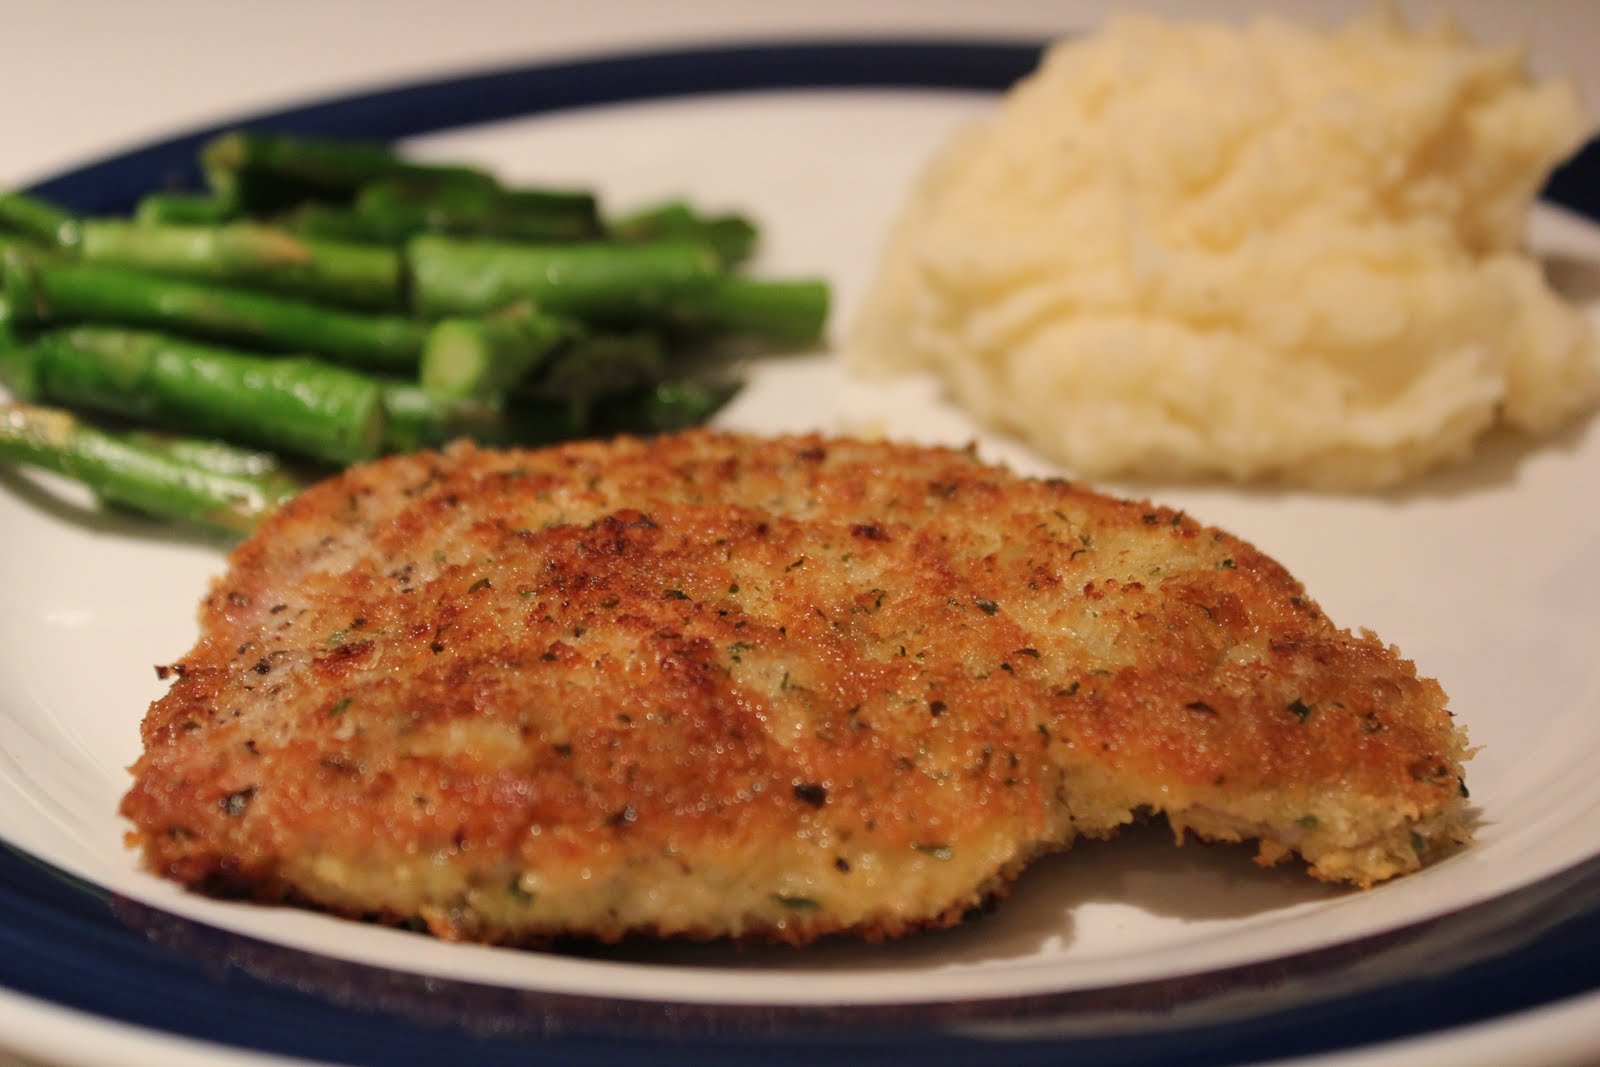 Near to Nothing: Breaded Pork Chops